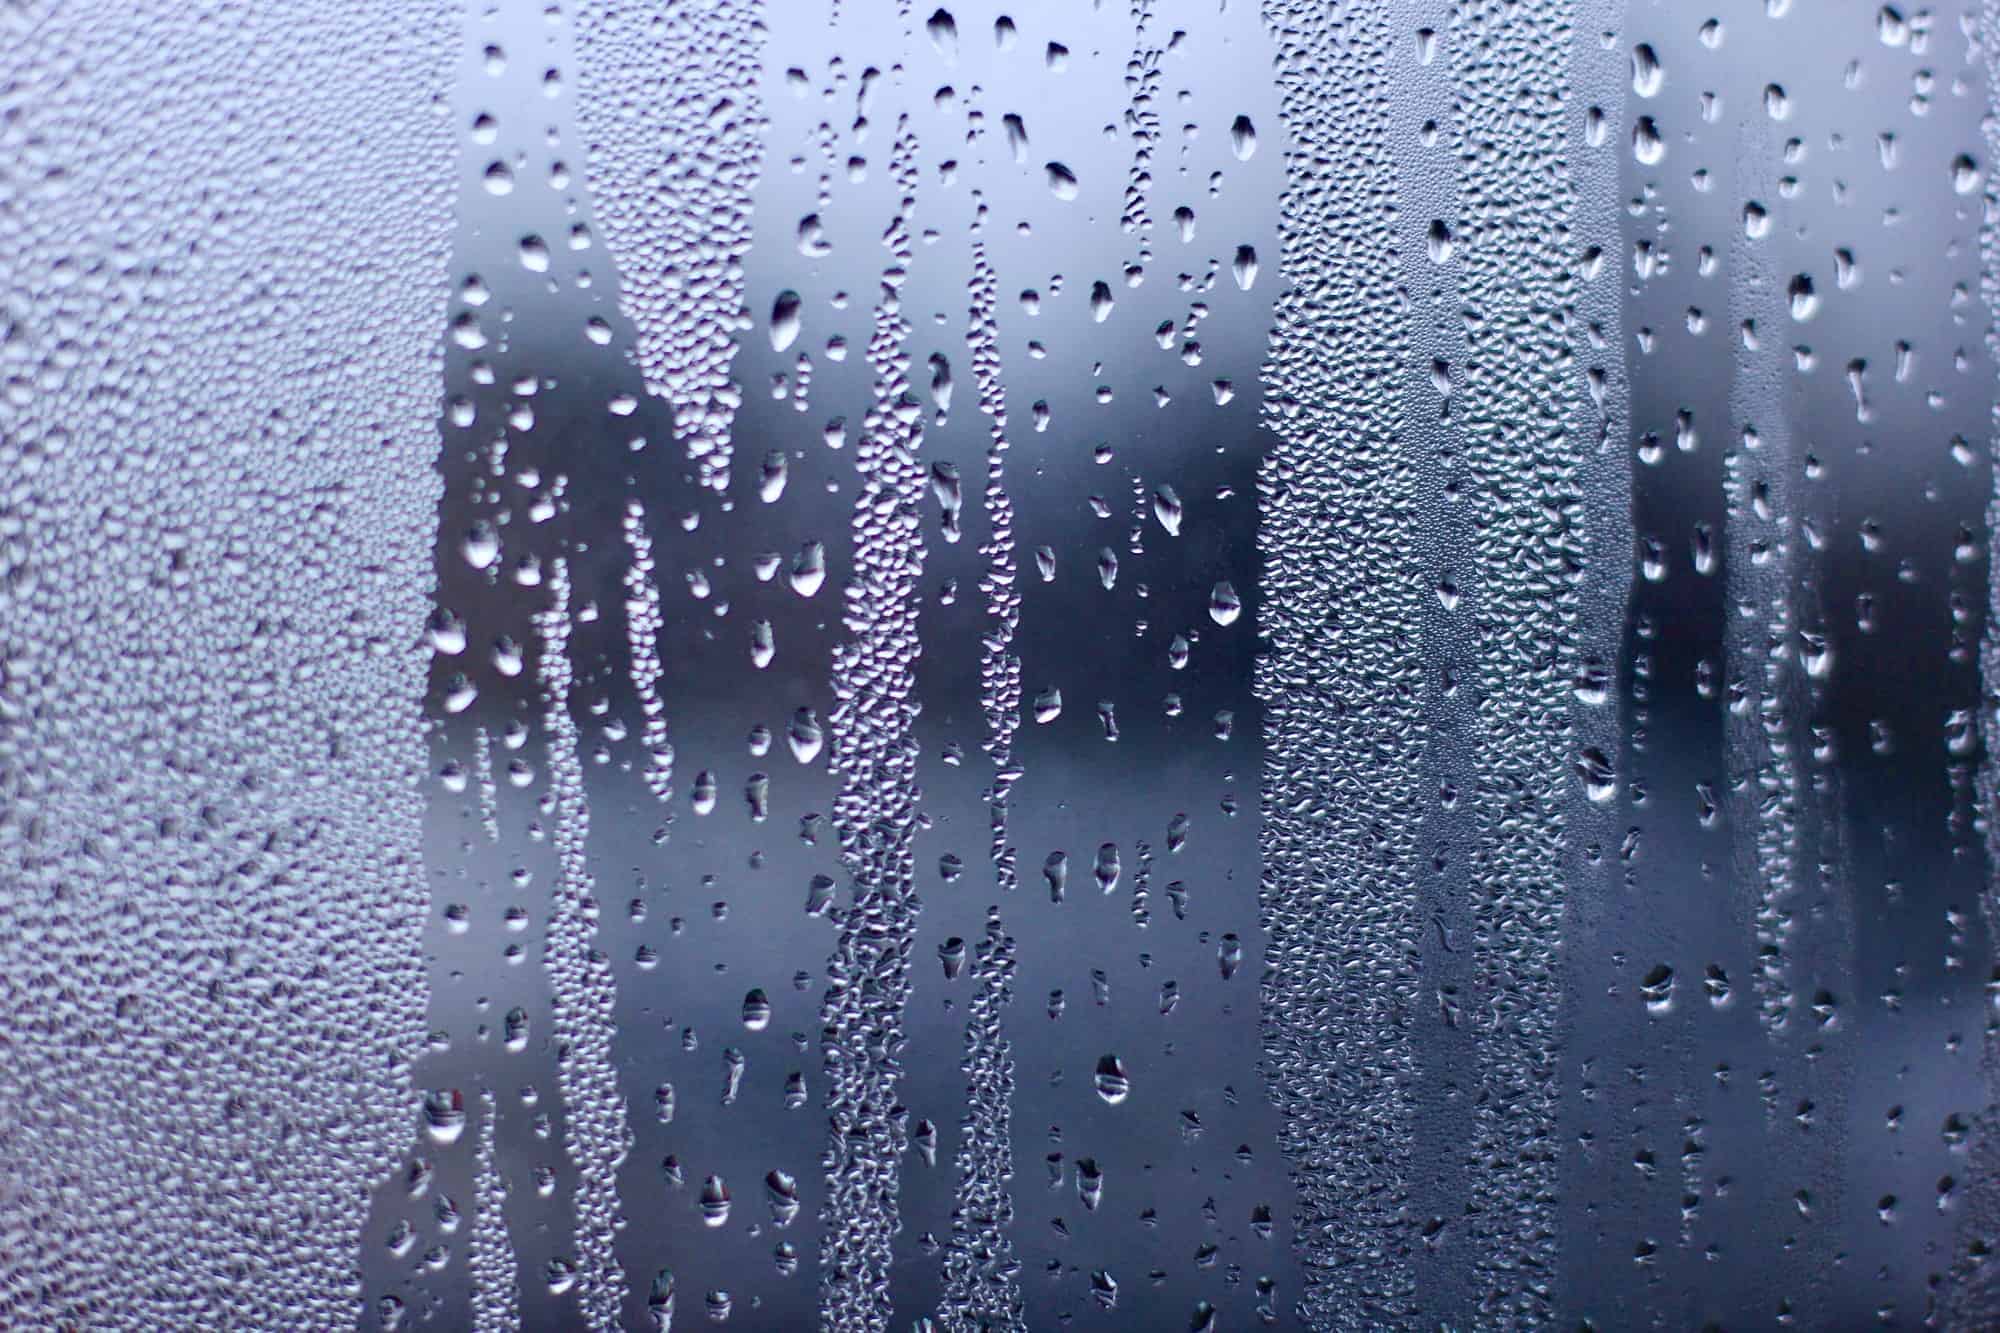 Water drops on the window glass. Condensation. Rain. Abstract background texture.